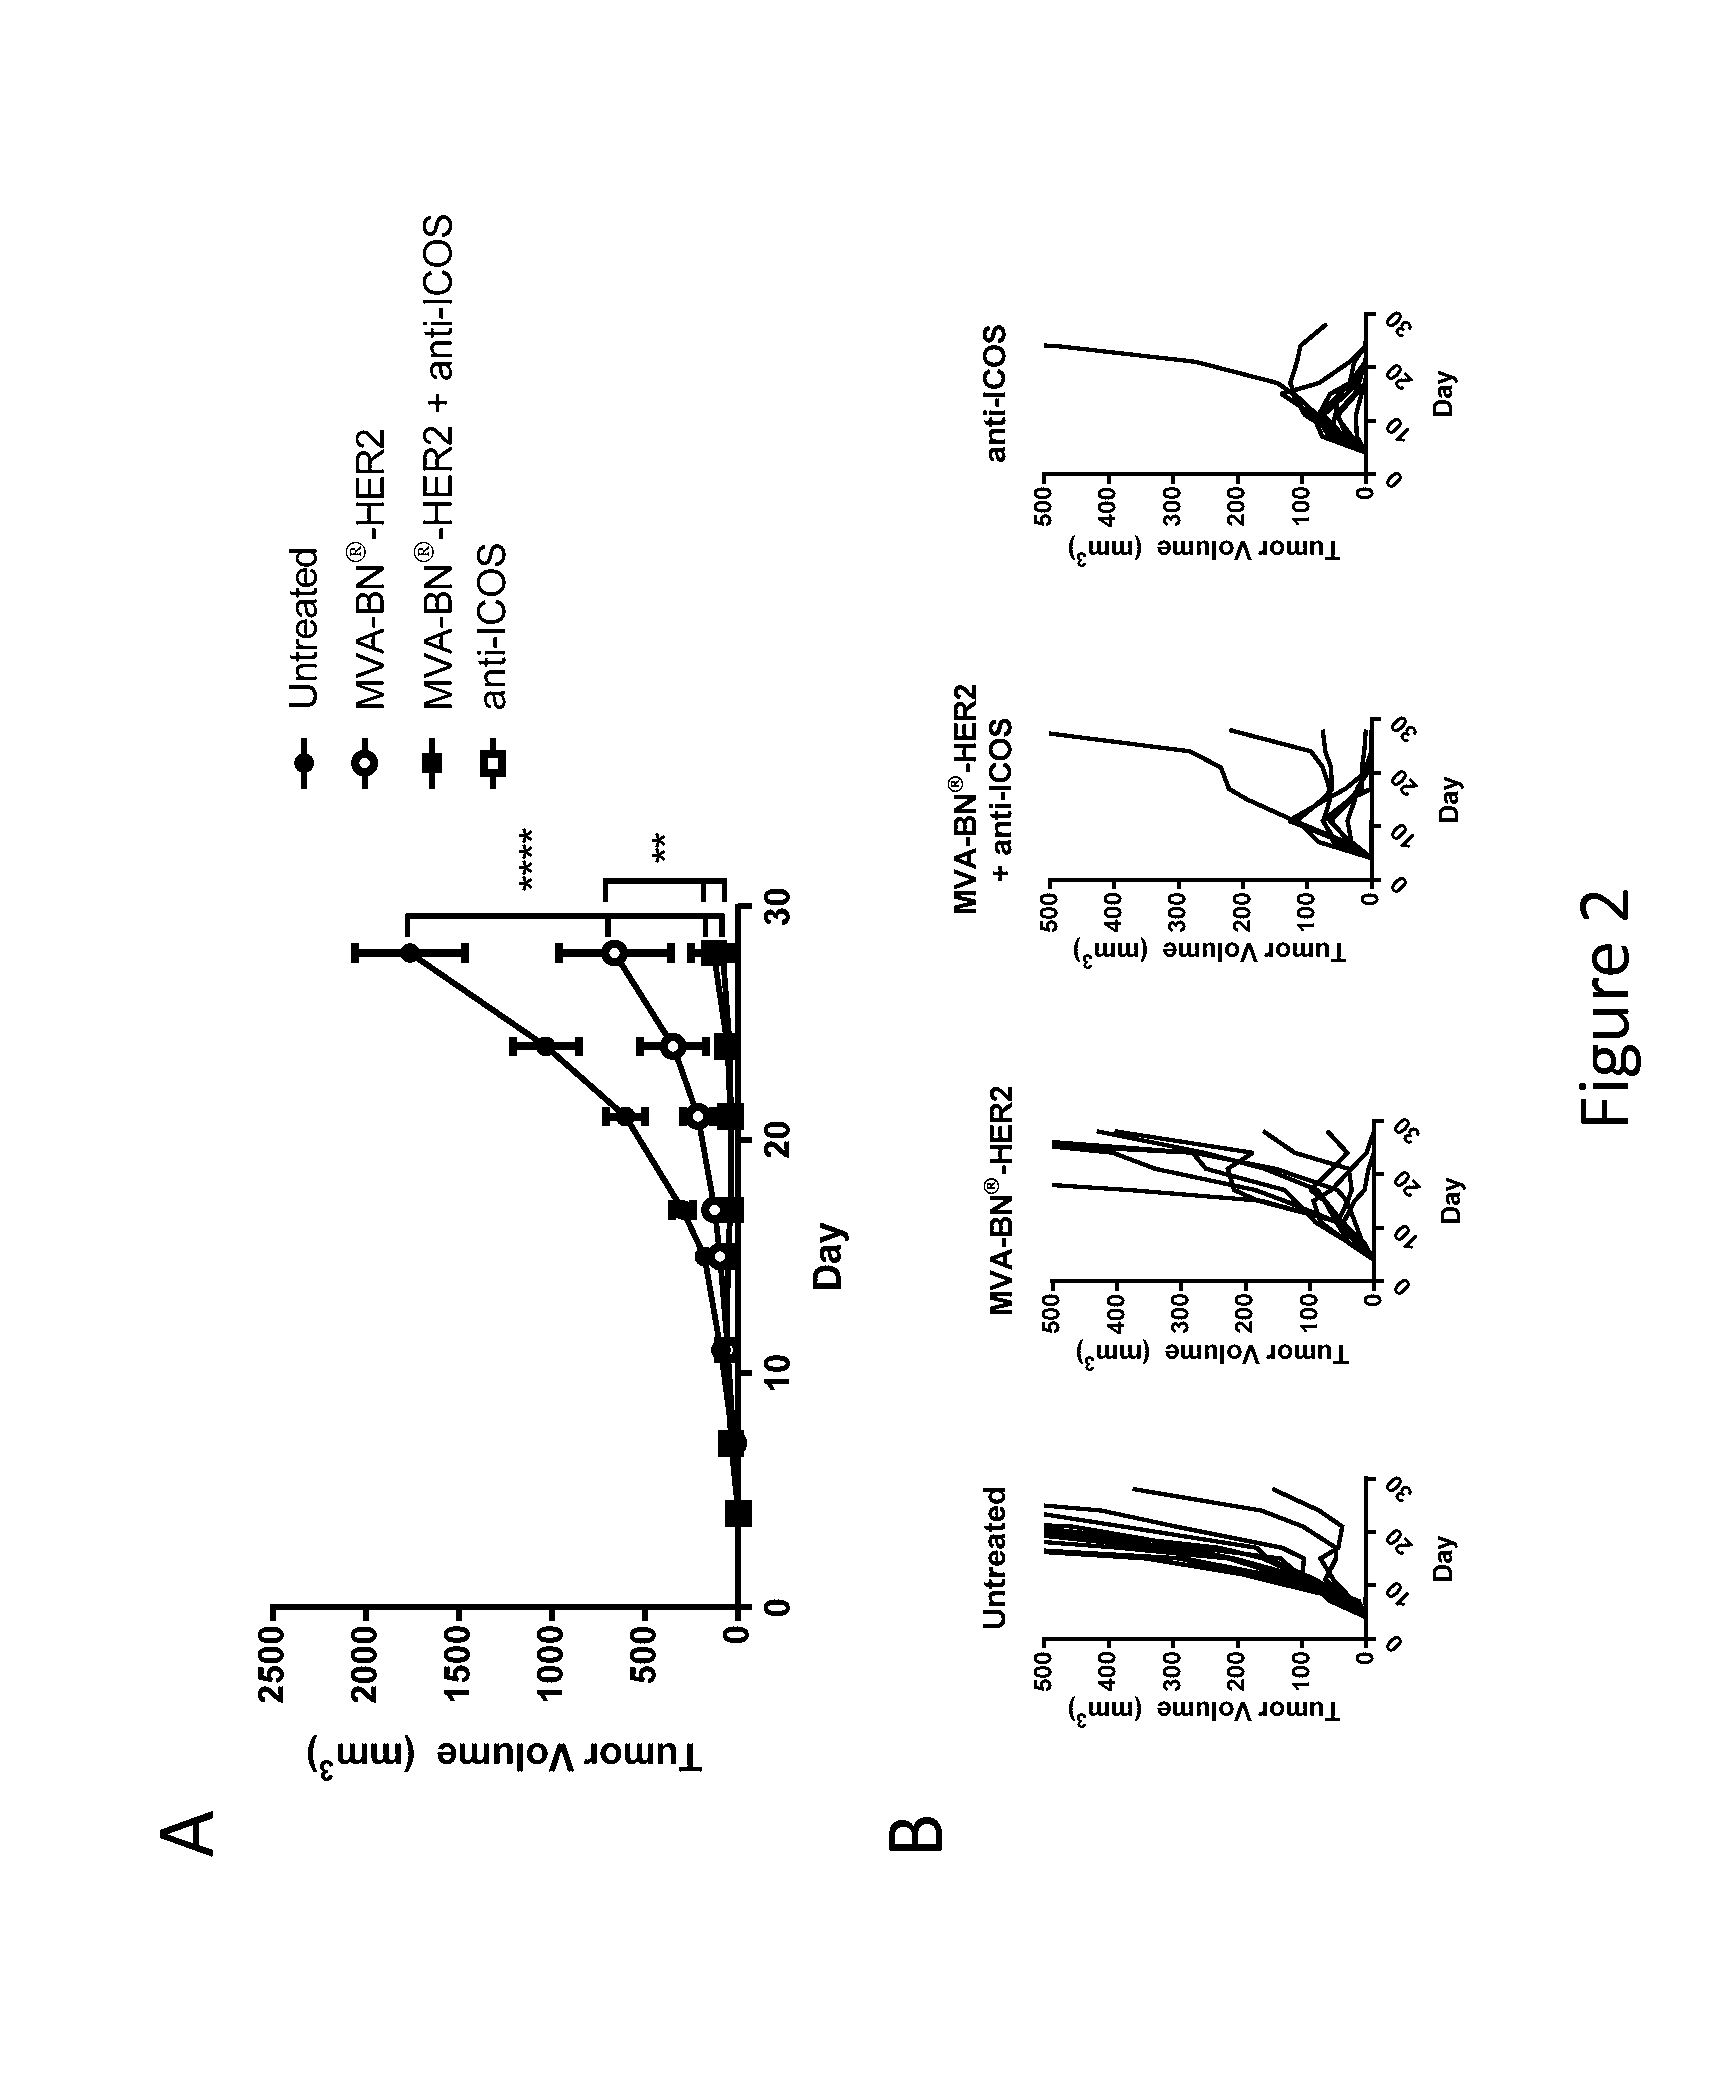 Combination Therapy for Treating Cancer with a Poxvirus Expressing a Tumor Antigen and an Antagonist and/or Agonist of an Immune Checkpoint Inhibitor